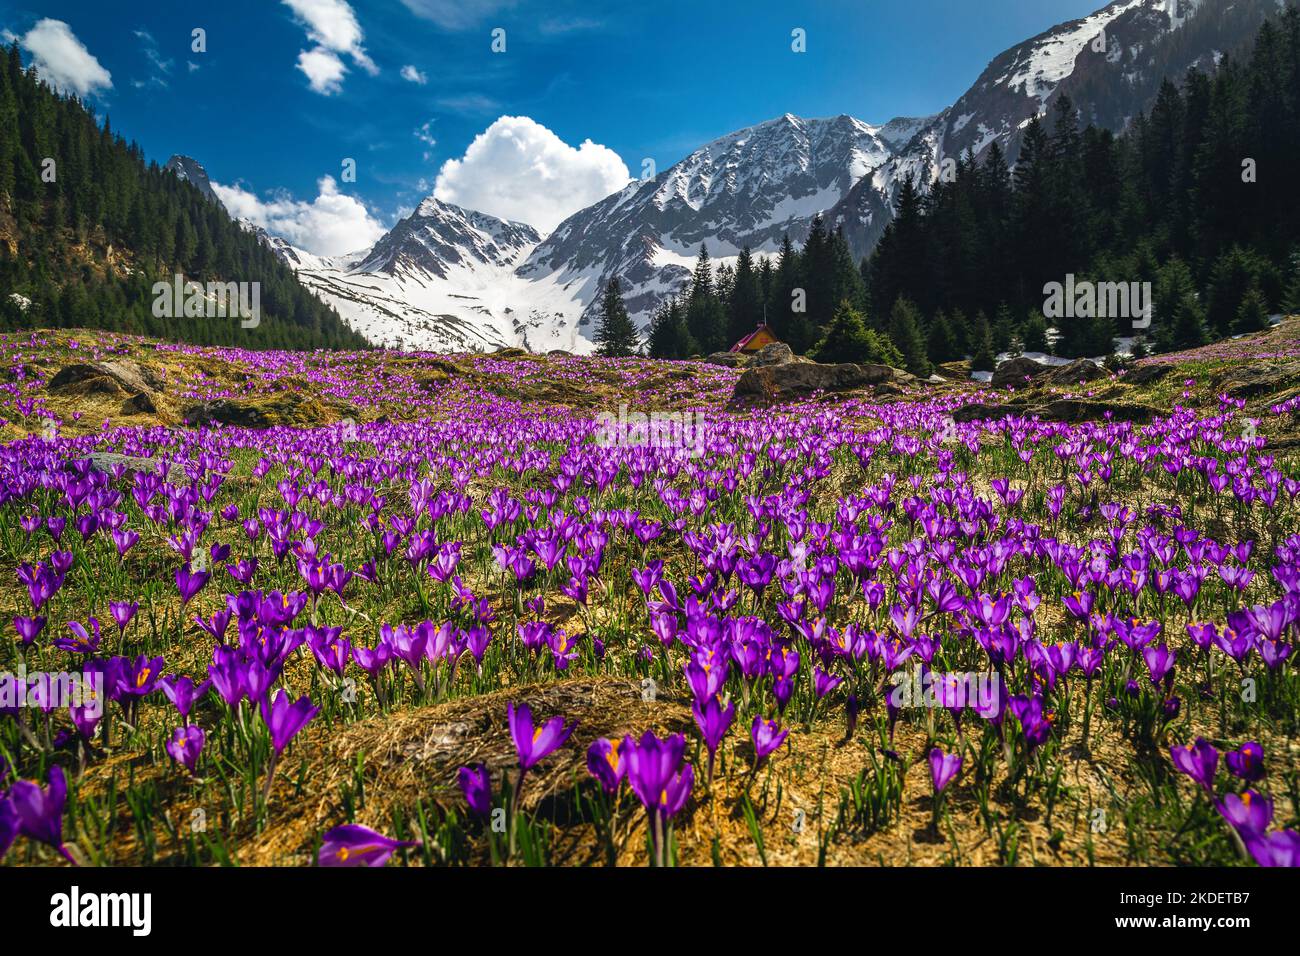 Majestic alpine spring landscape, flowery mountain slope with blooming purple crocus flowers and snowy mountains in background, Fagaras mountains, Car Stock Photo